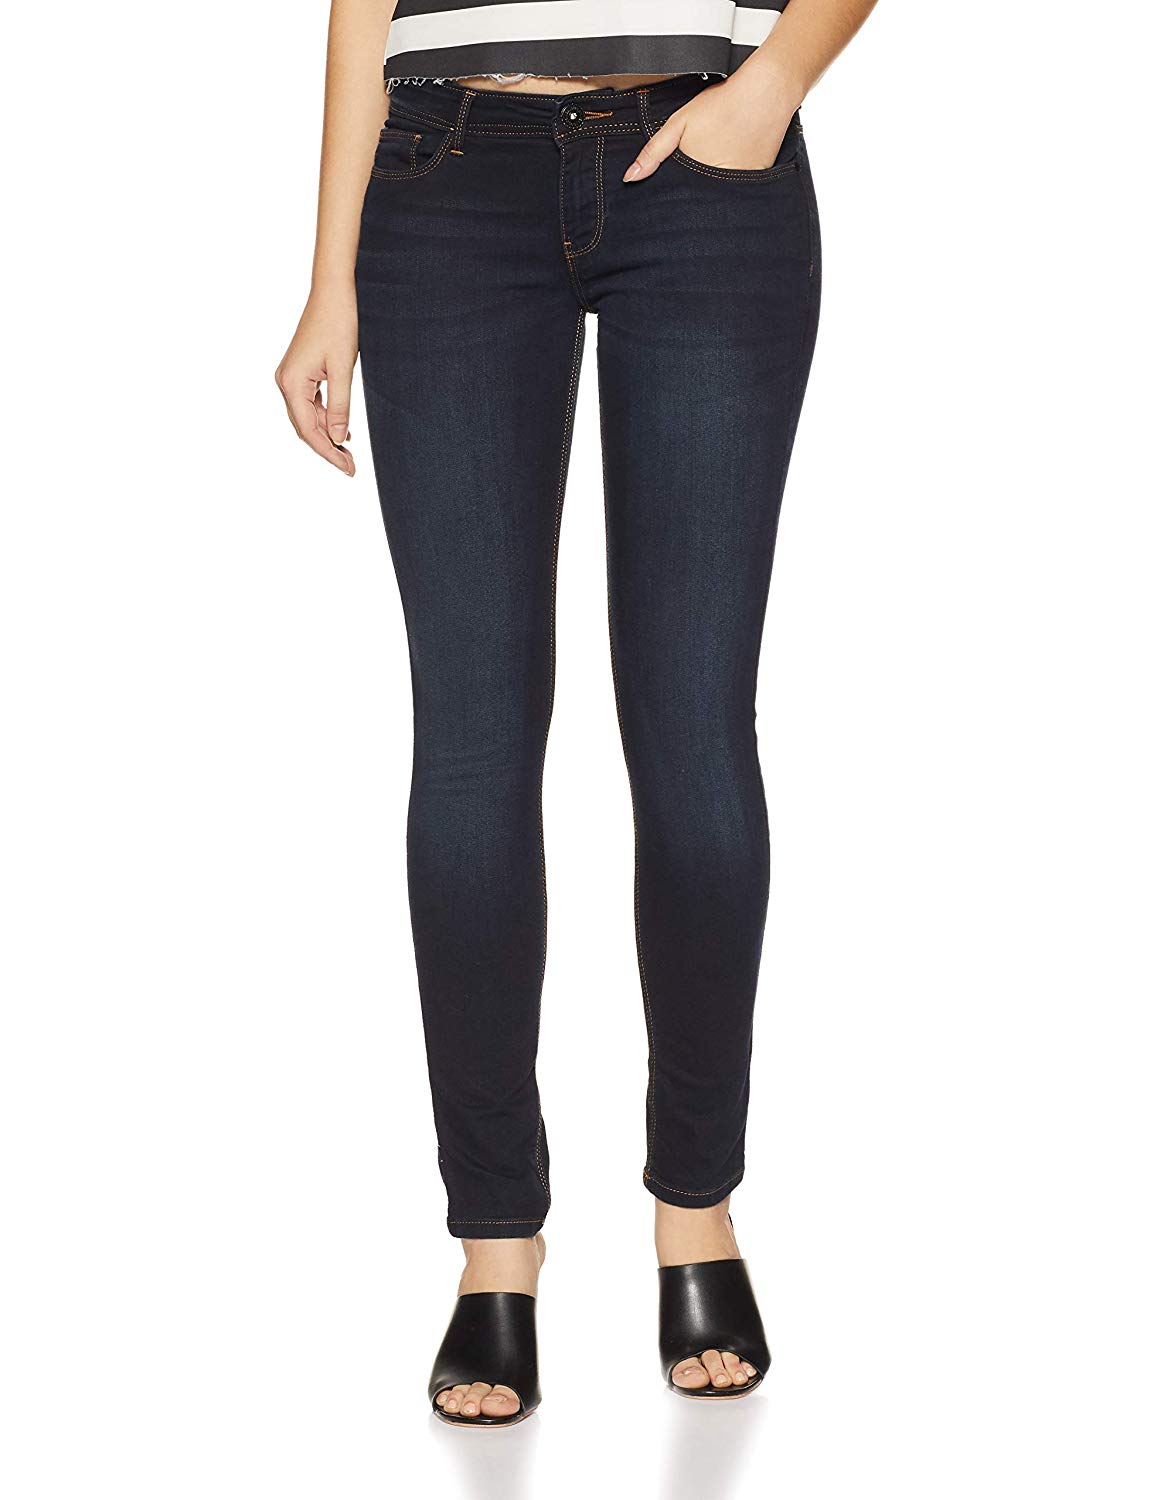 Amazon - Jealous 21 Women's Skinny Jeans - Suggested Products